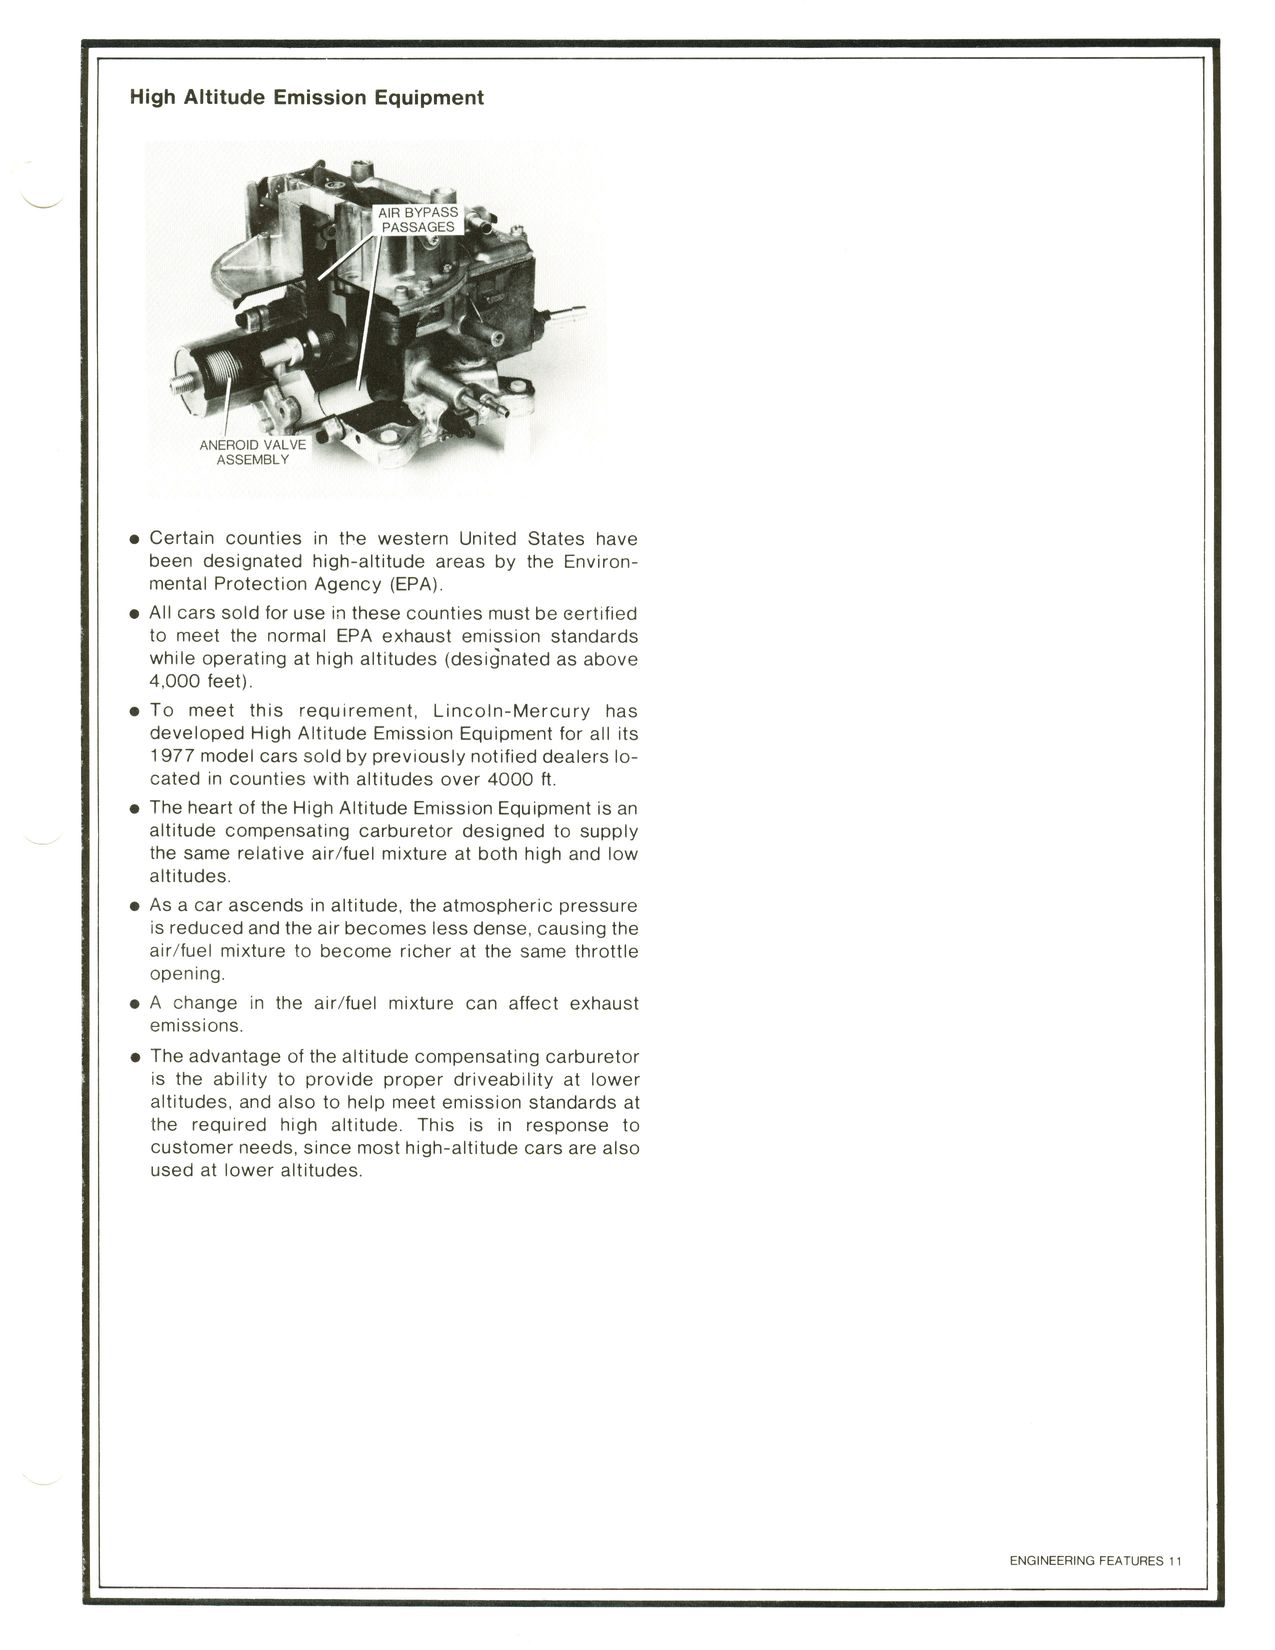 1977_Continental_Product_Facts_Book-3-11